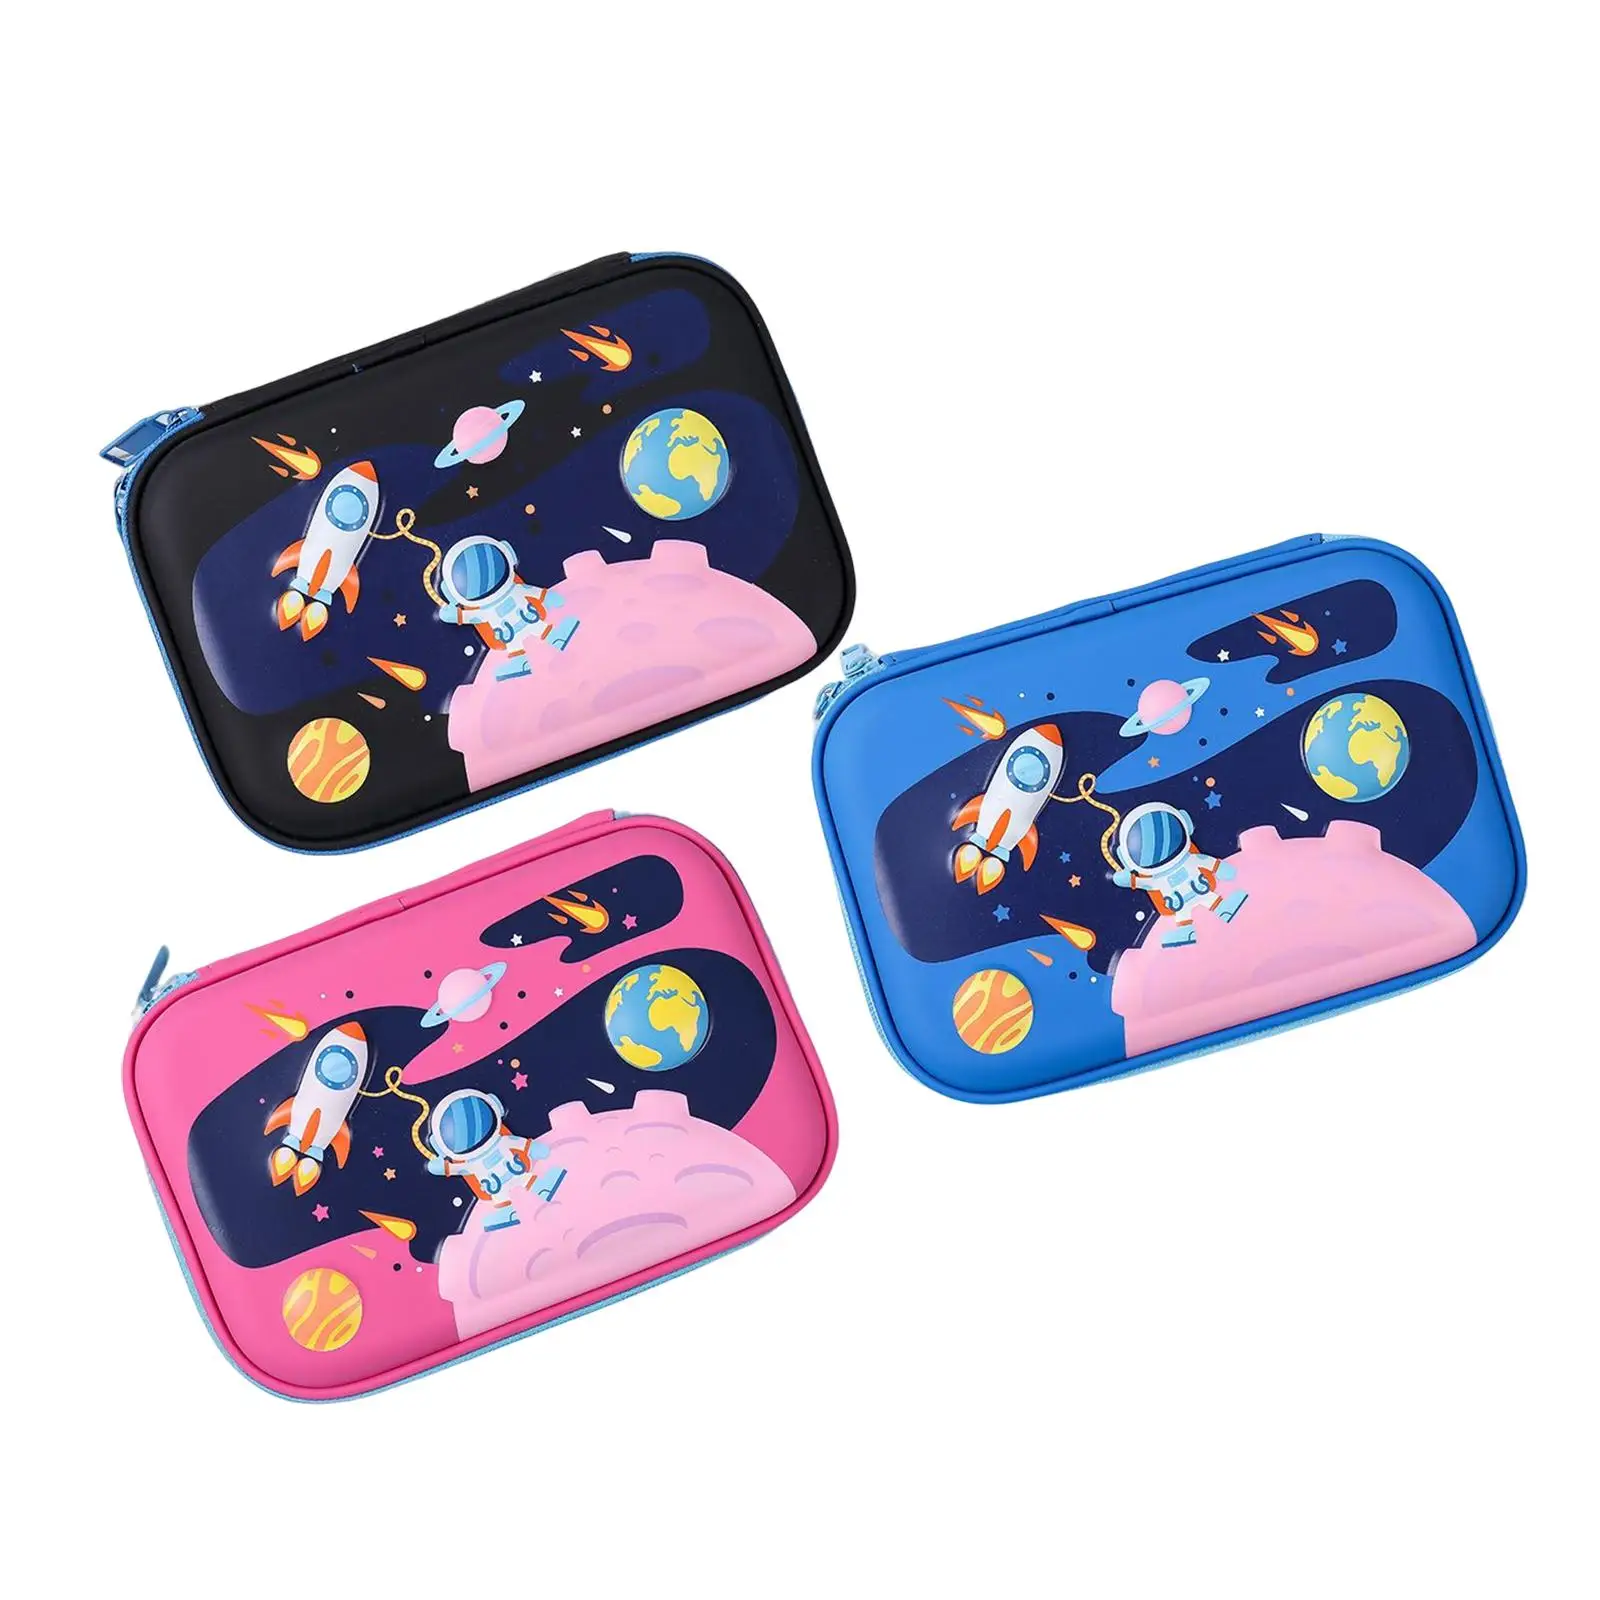 Astronaut Pencil Case Office Stationery Organizer Cosmetic Bag Pen Marker Holder Multifunction for Teen Kids Holiday Gifts